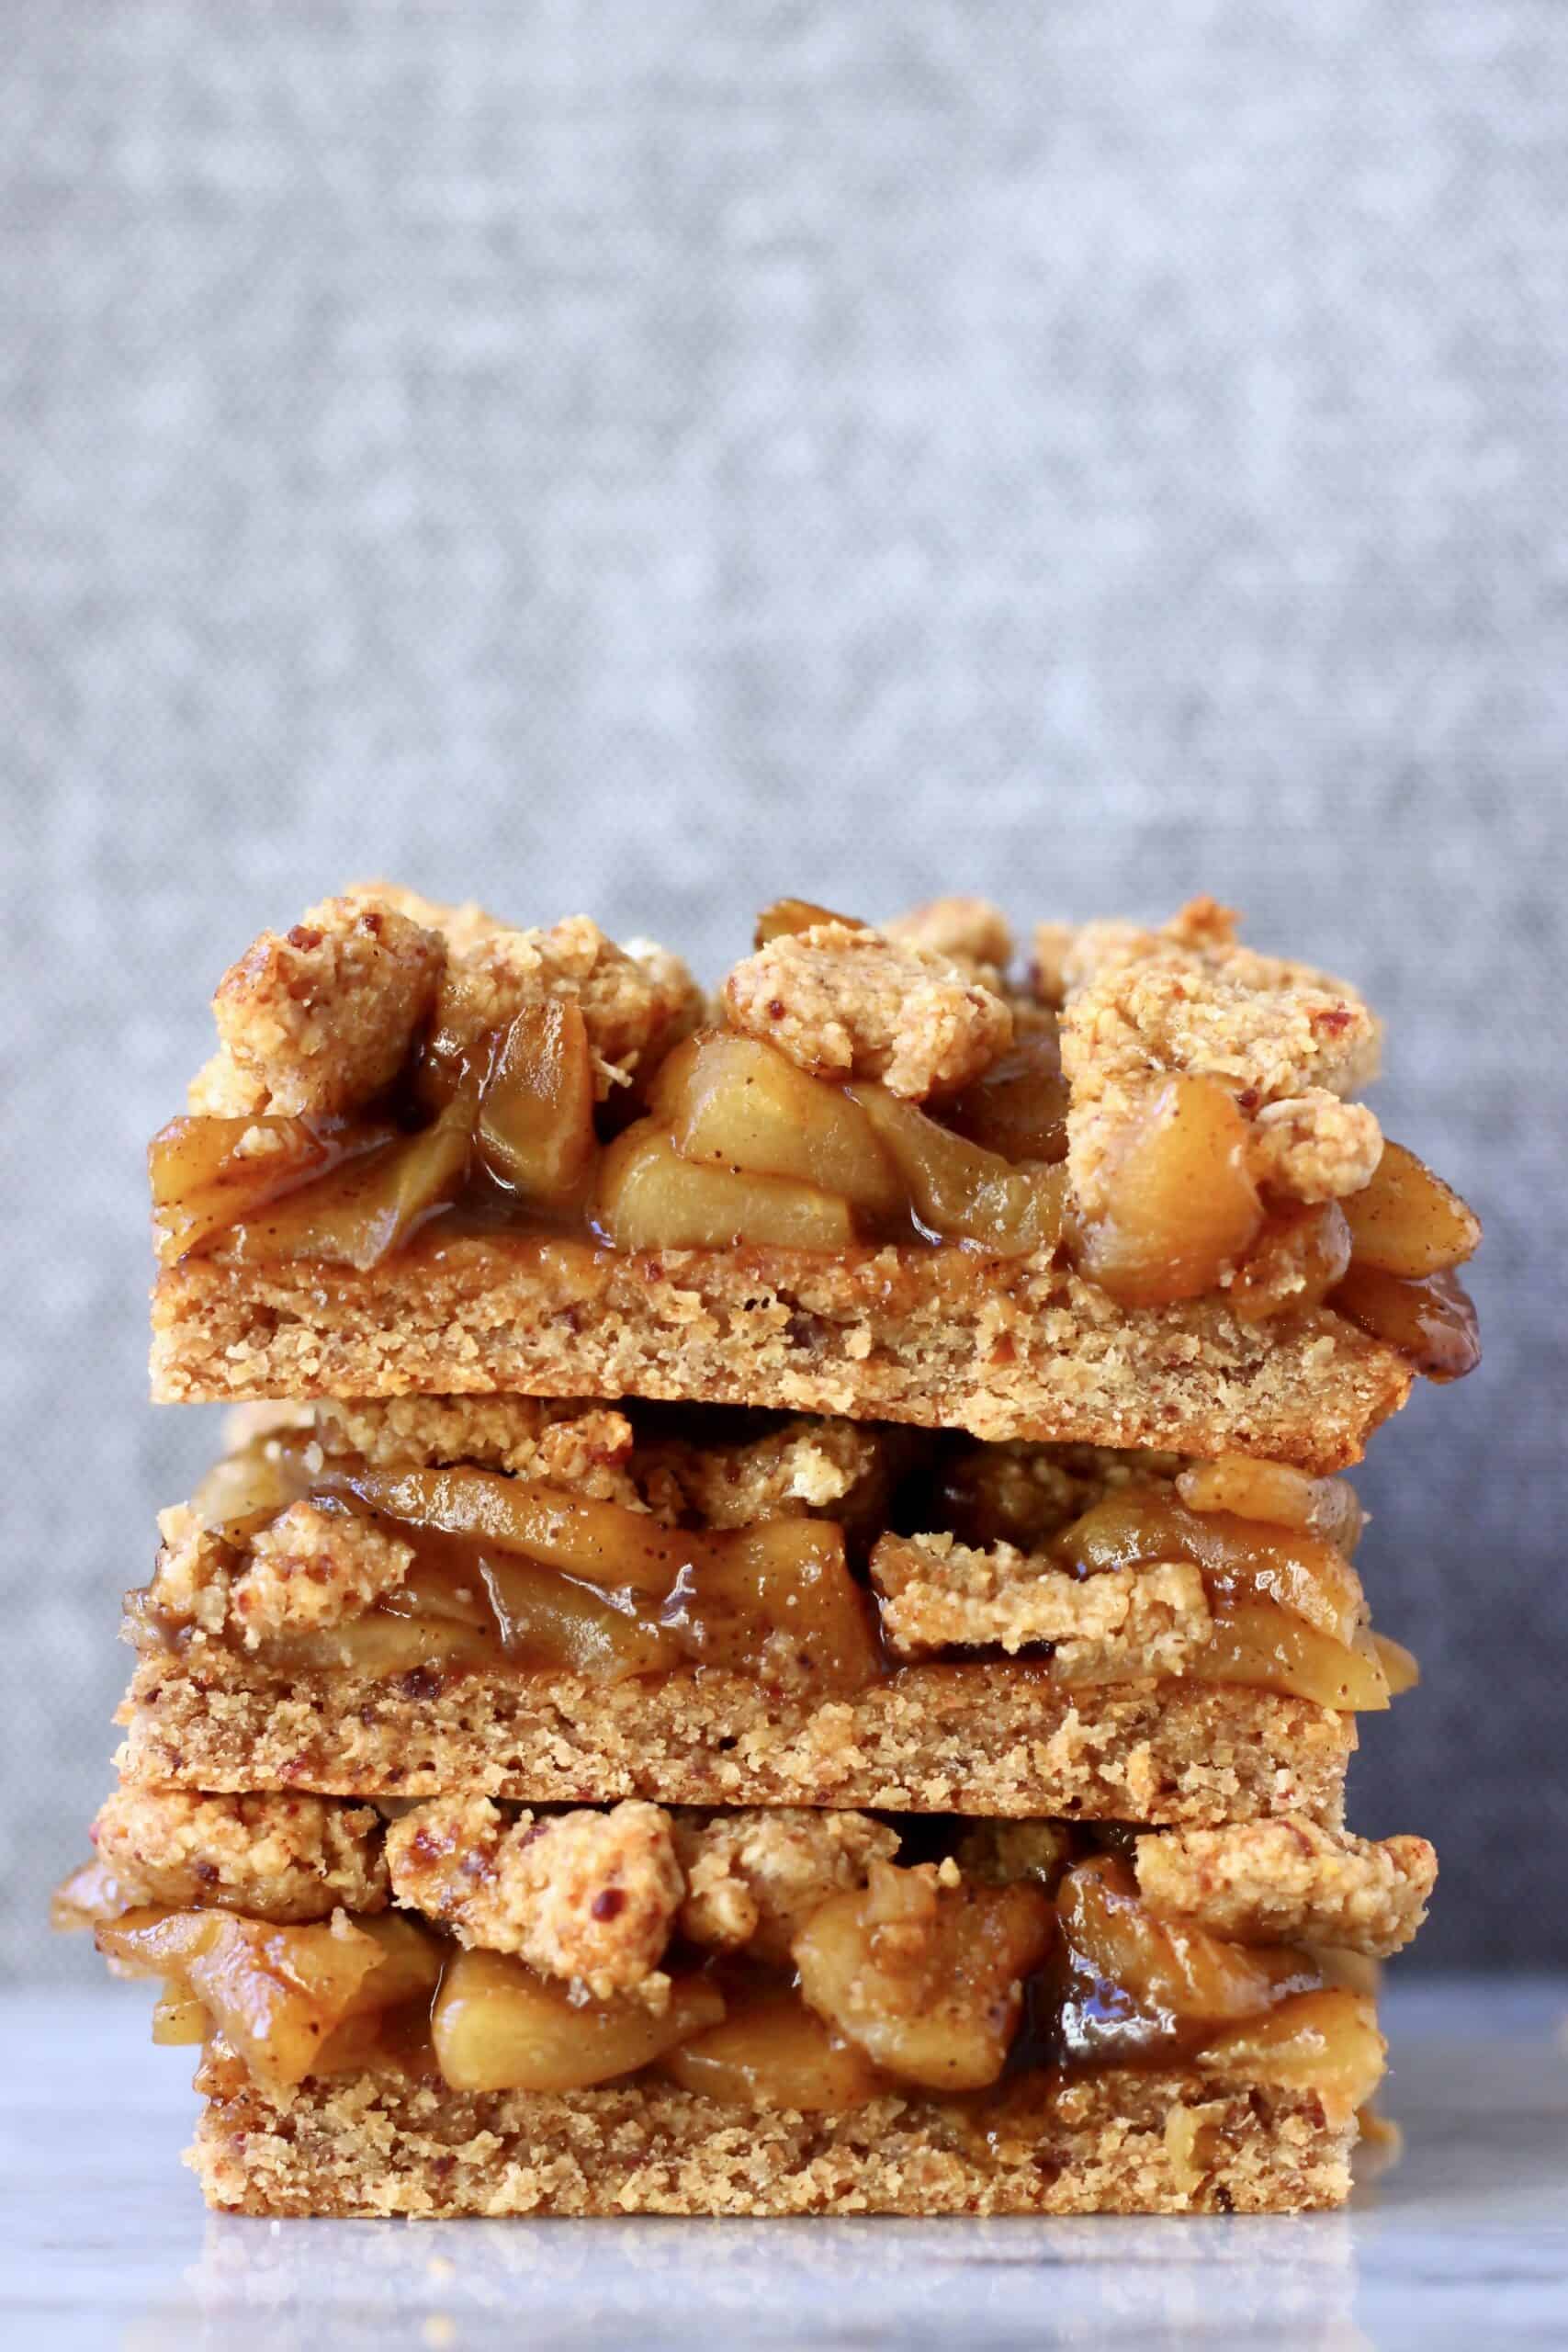 A stack of three gluten-free vegan apple crumble bars on a marble slab against a grey background